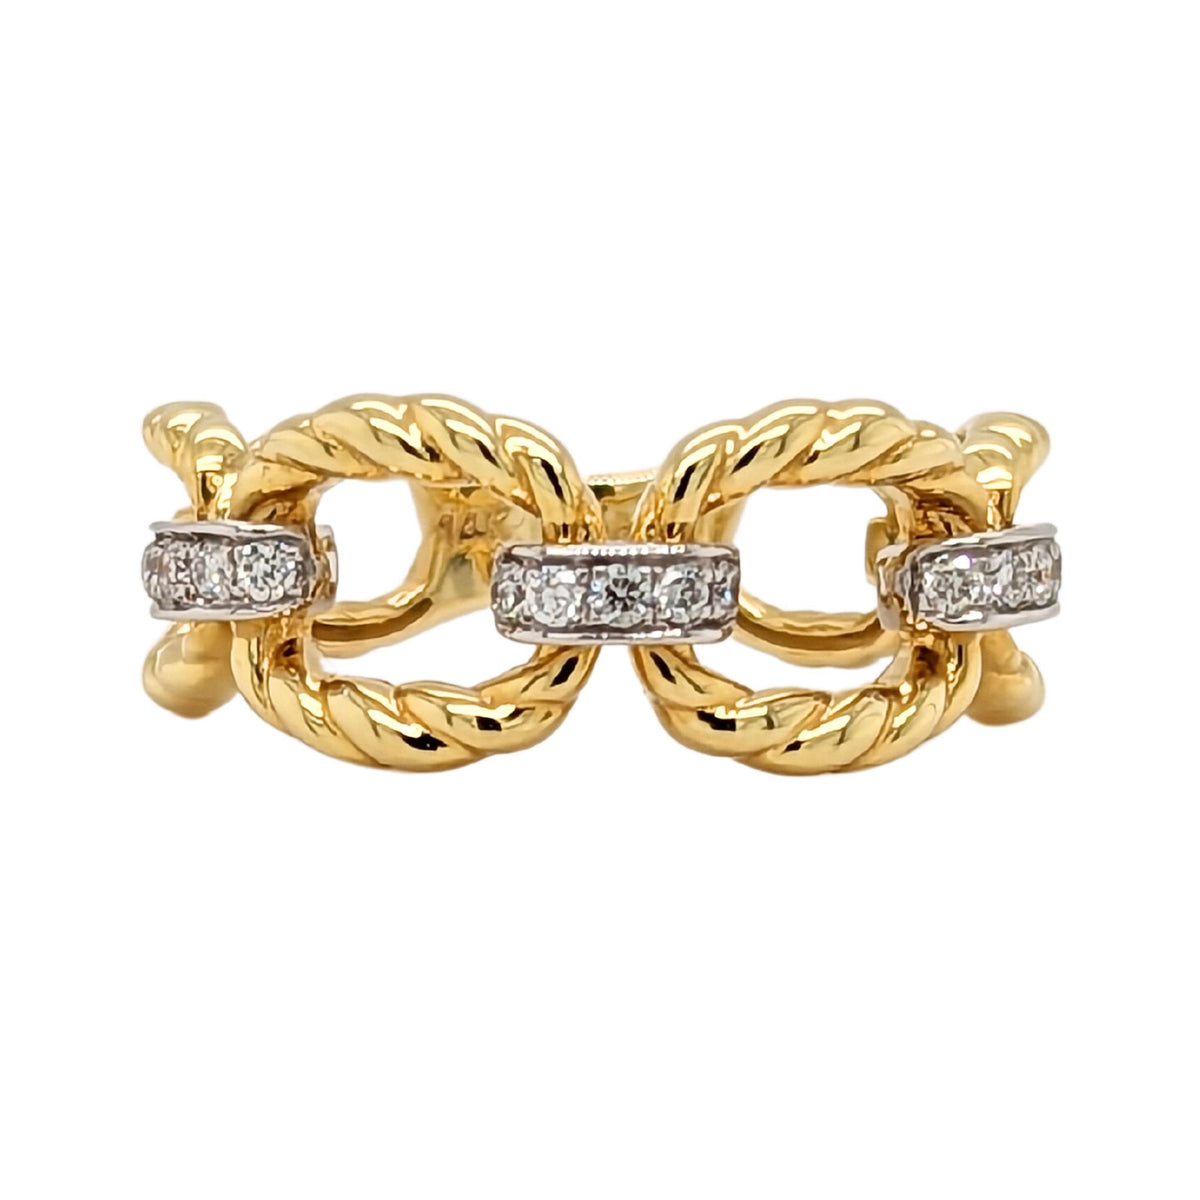 14K Gold Diamond Accented Oval Link Ring